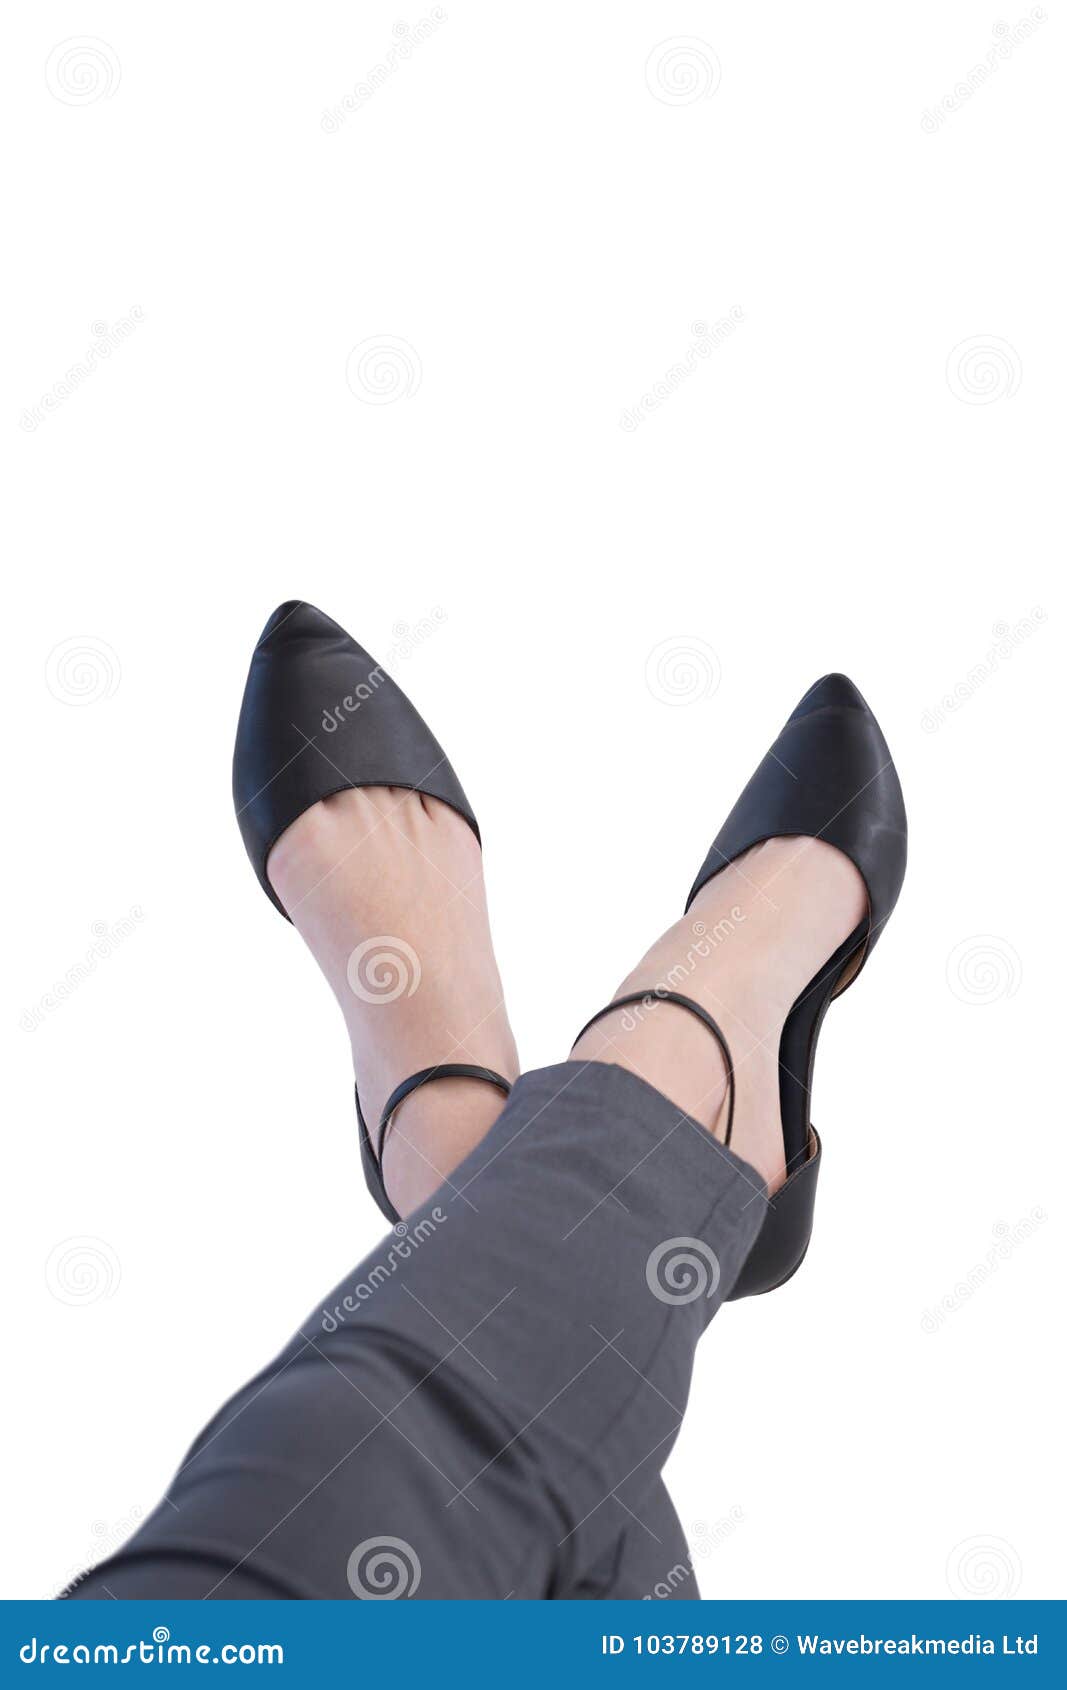 Female Legs Crossed Business Stock Photos - Download 1,043 Royalty Free ...